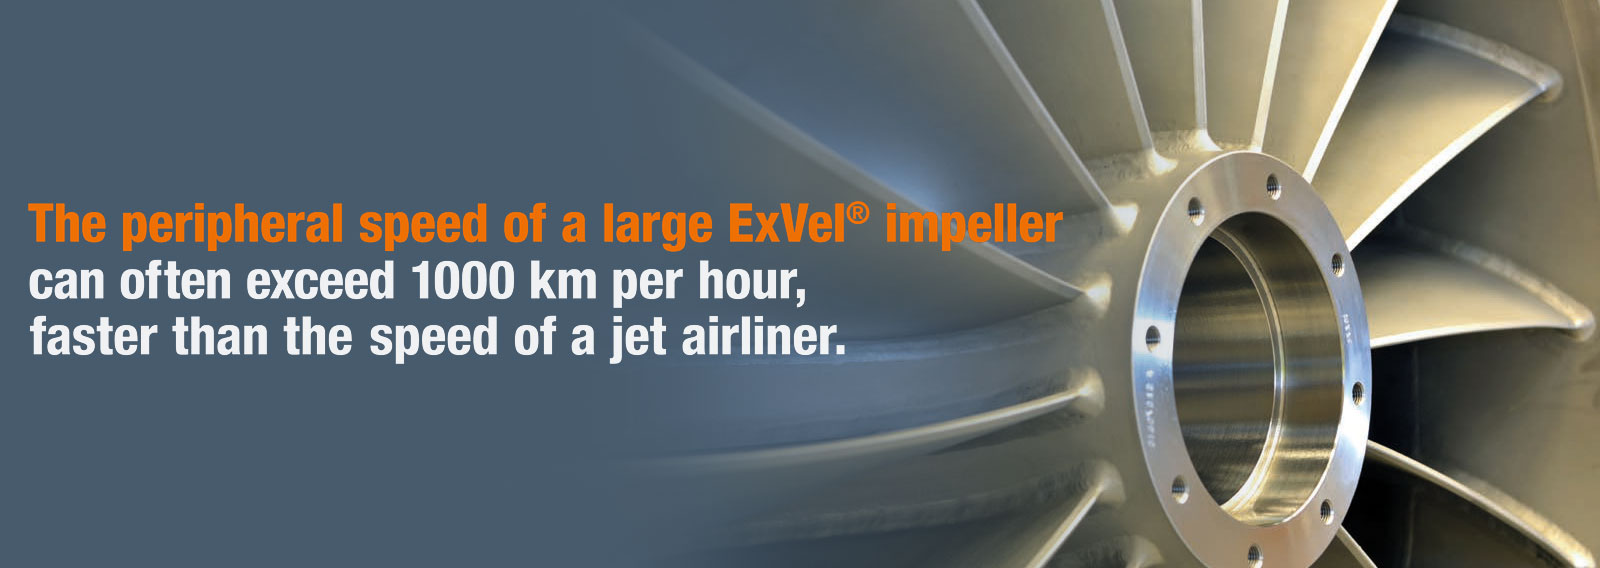 ExVel turbo fan with text "The peripheral speed of a large ExVel impeller can often exceed 1000 km per hour, faster than the speed of a jet airliner."